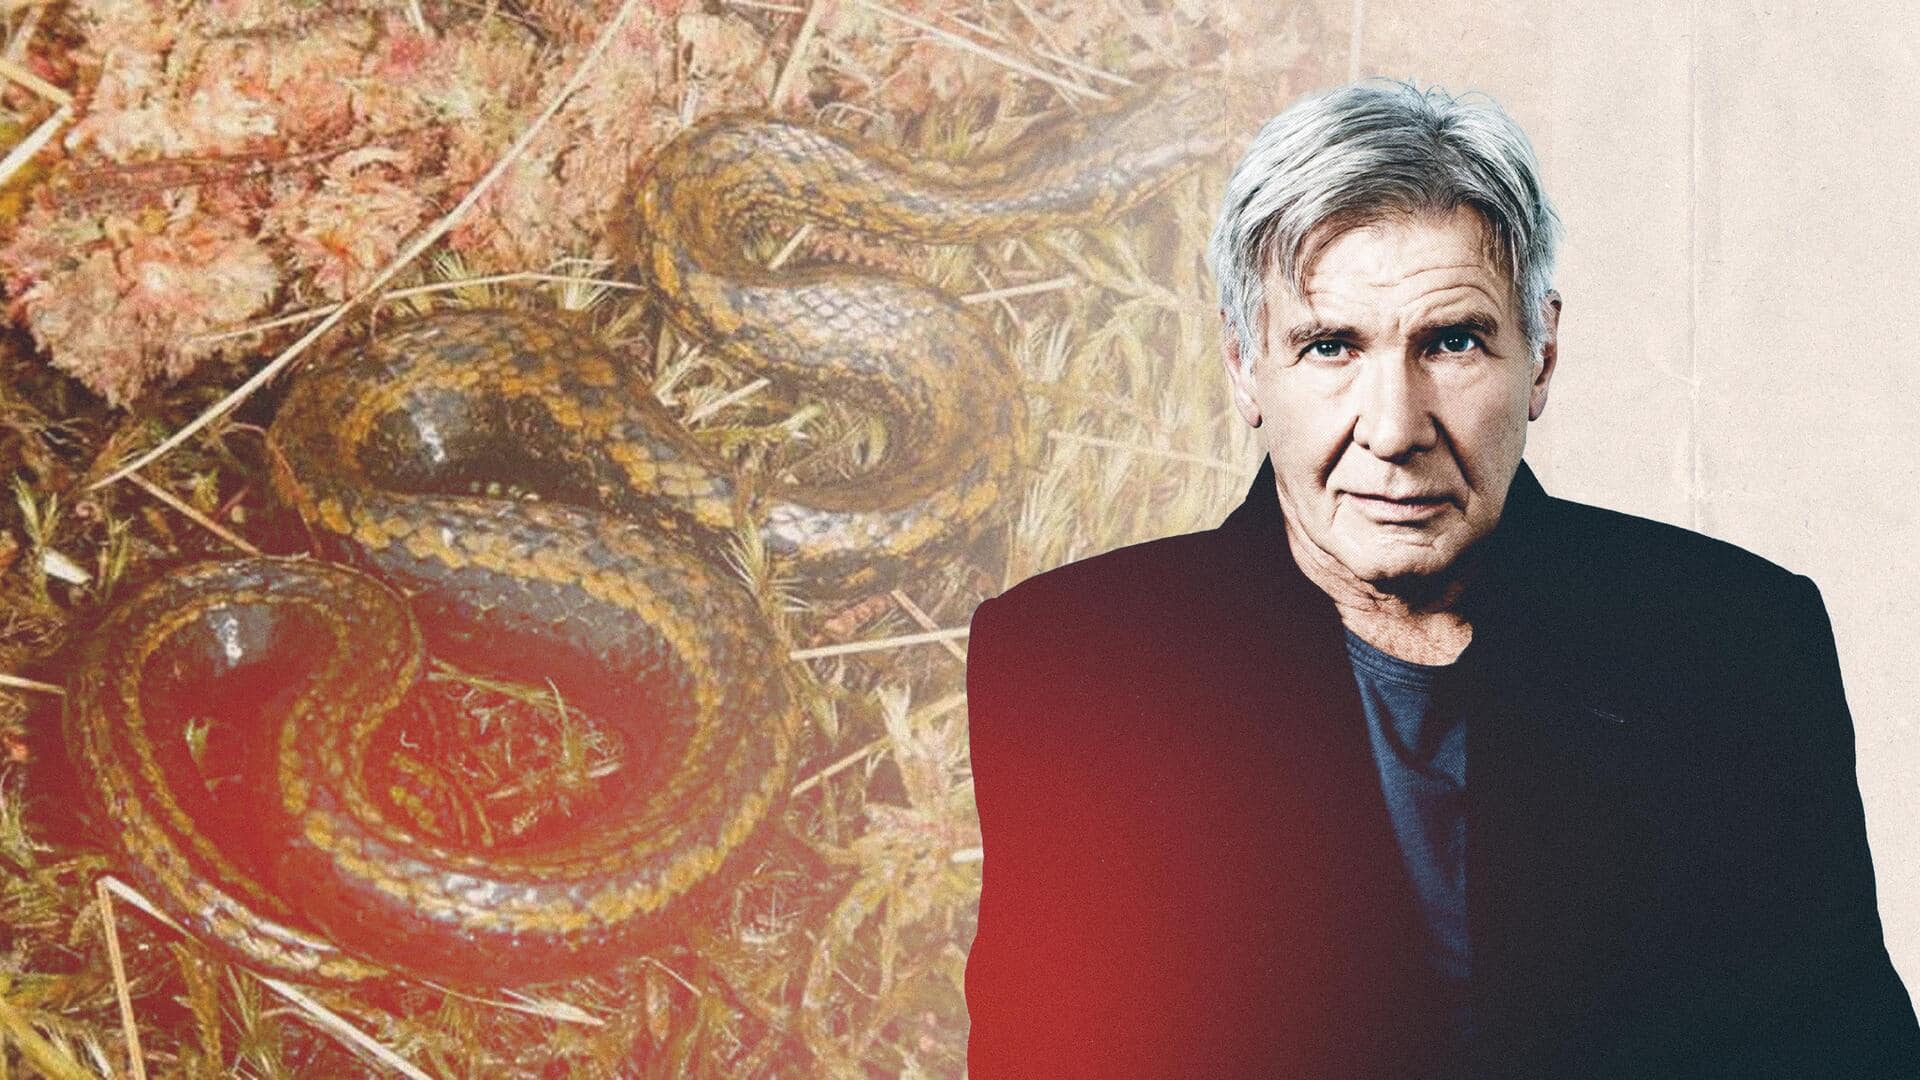 New snake species named after Hollywood actor Harrison Ford